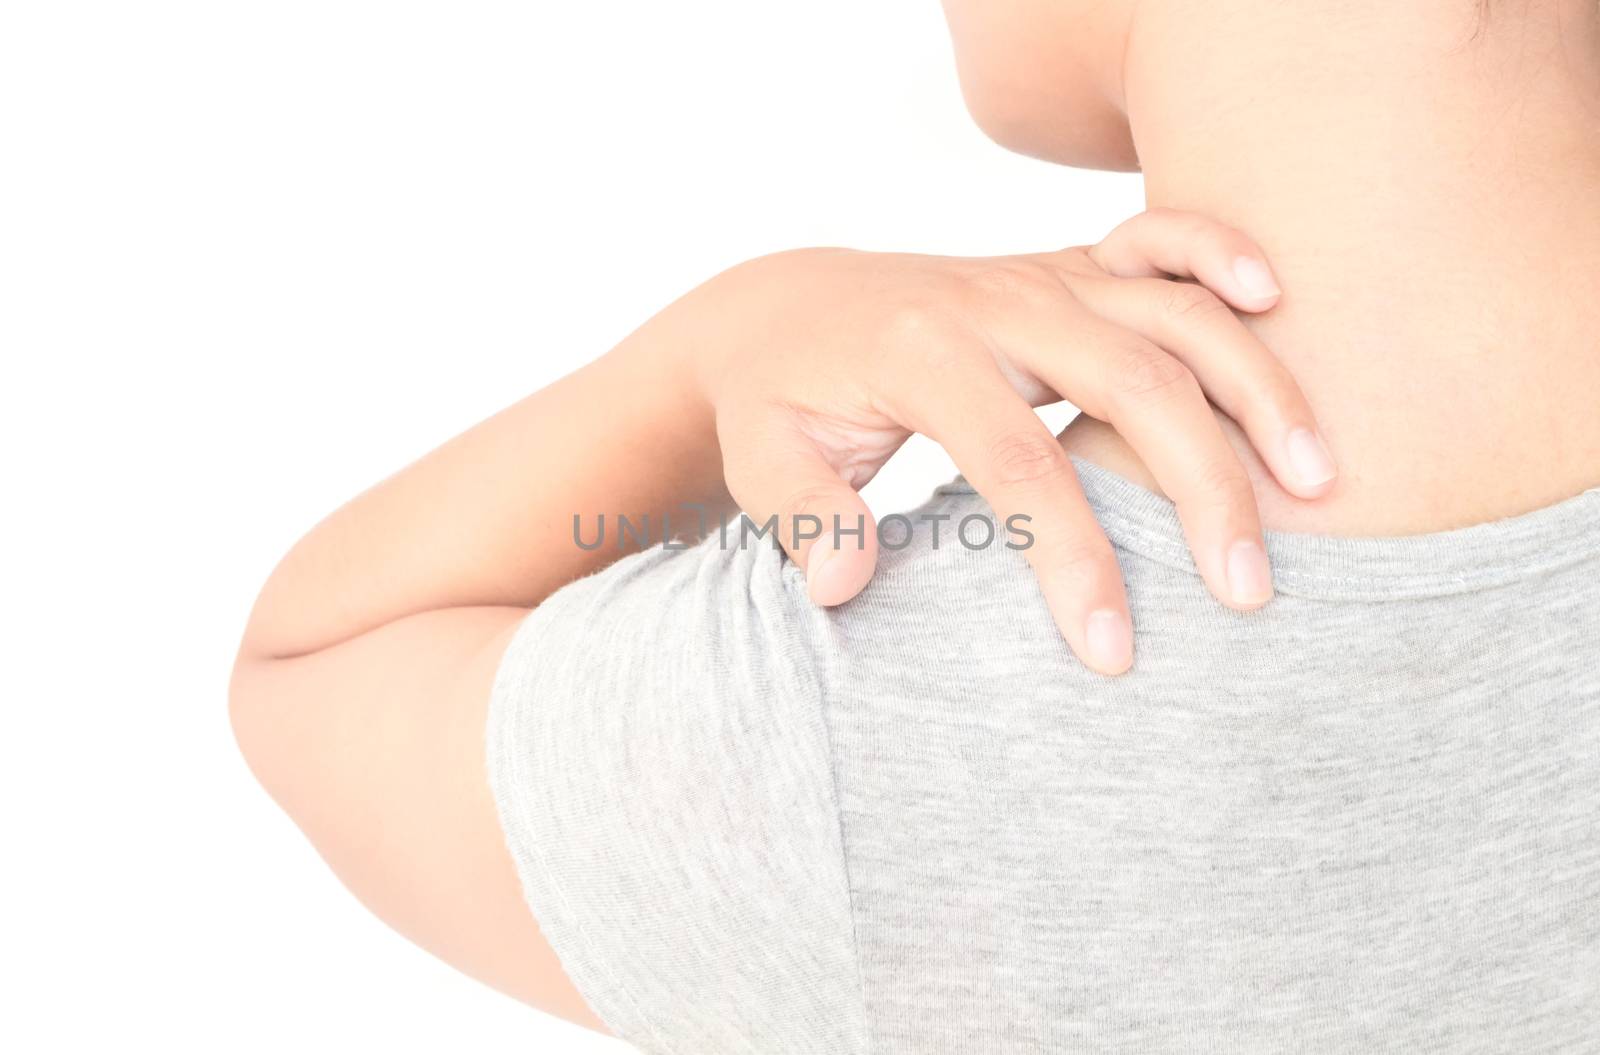 Woman Itching on shoulder or neck pain  with white background for healthy concept